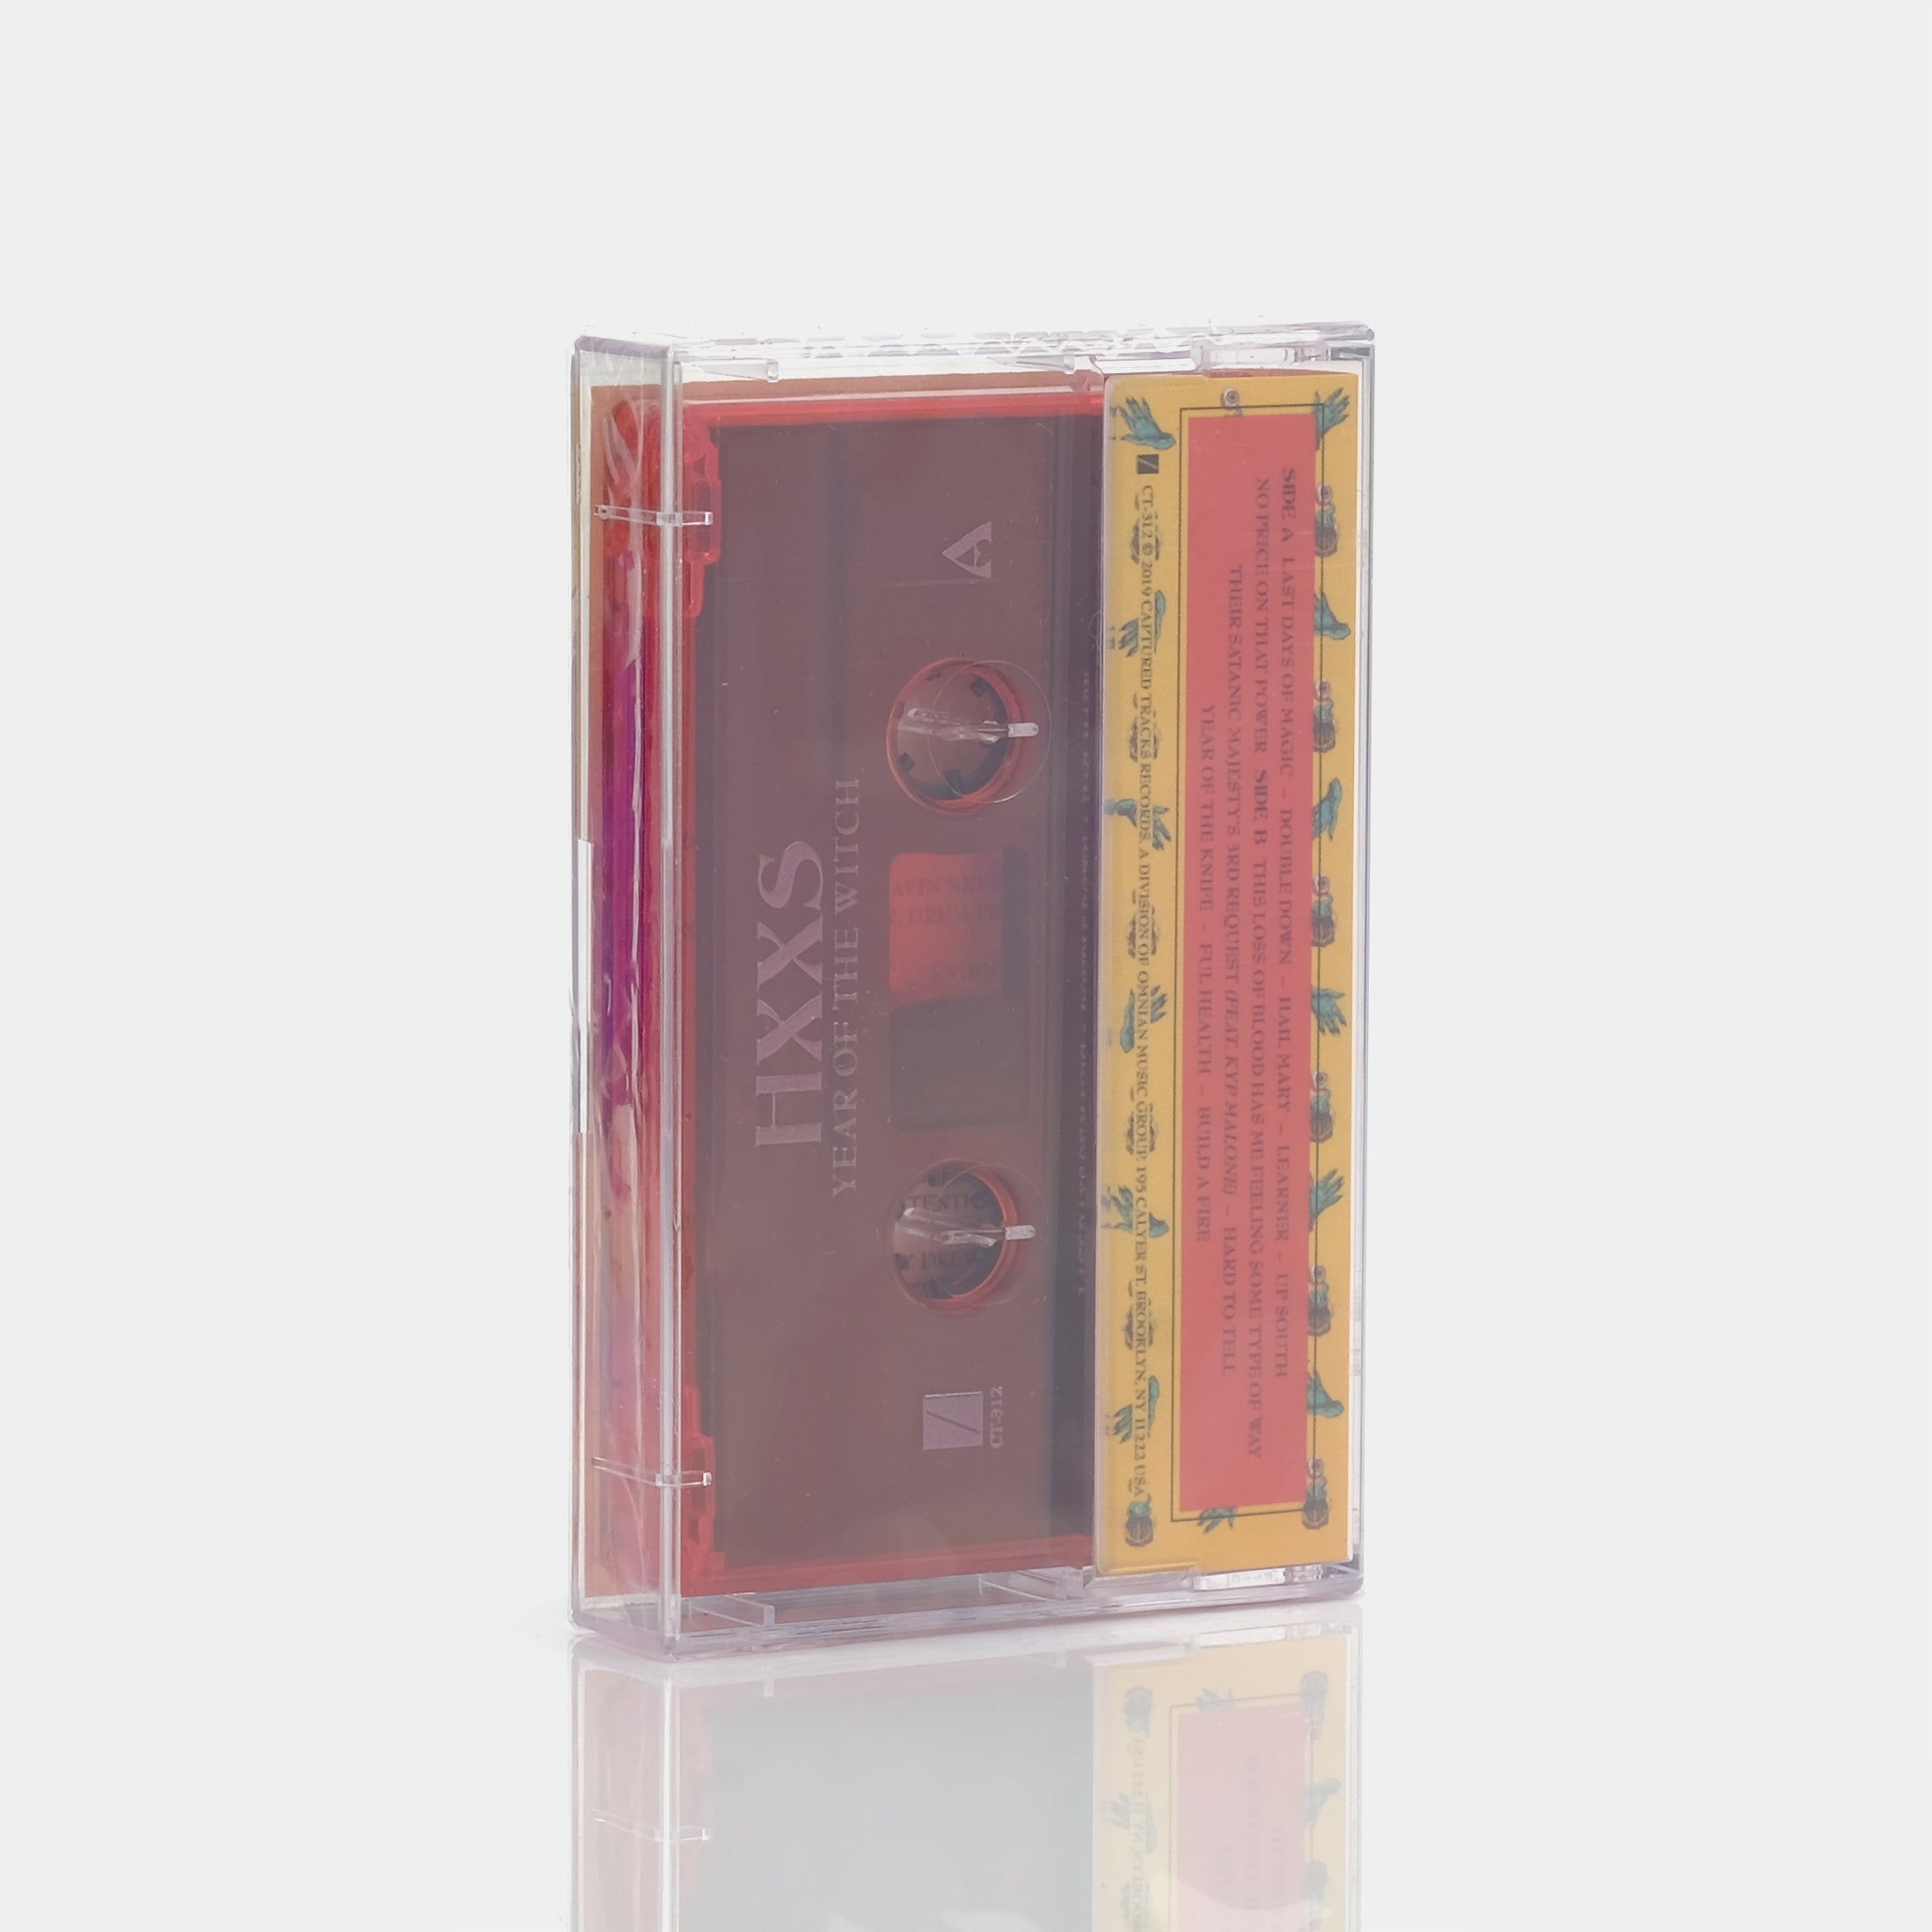 HXXS - Year Of The Witch Cassette Tape